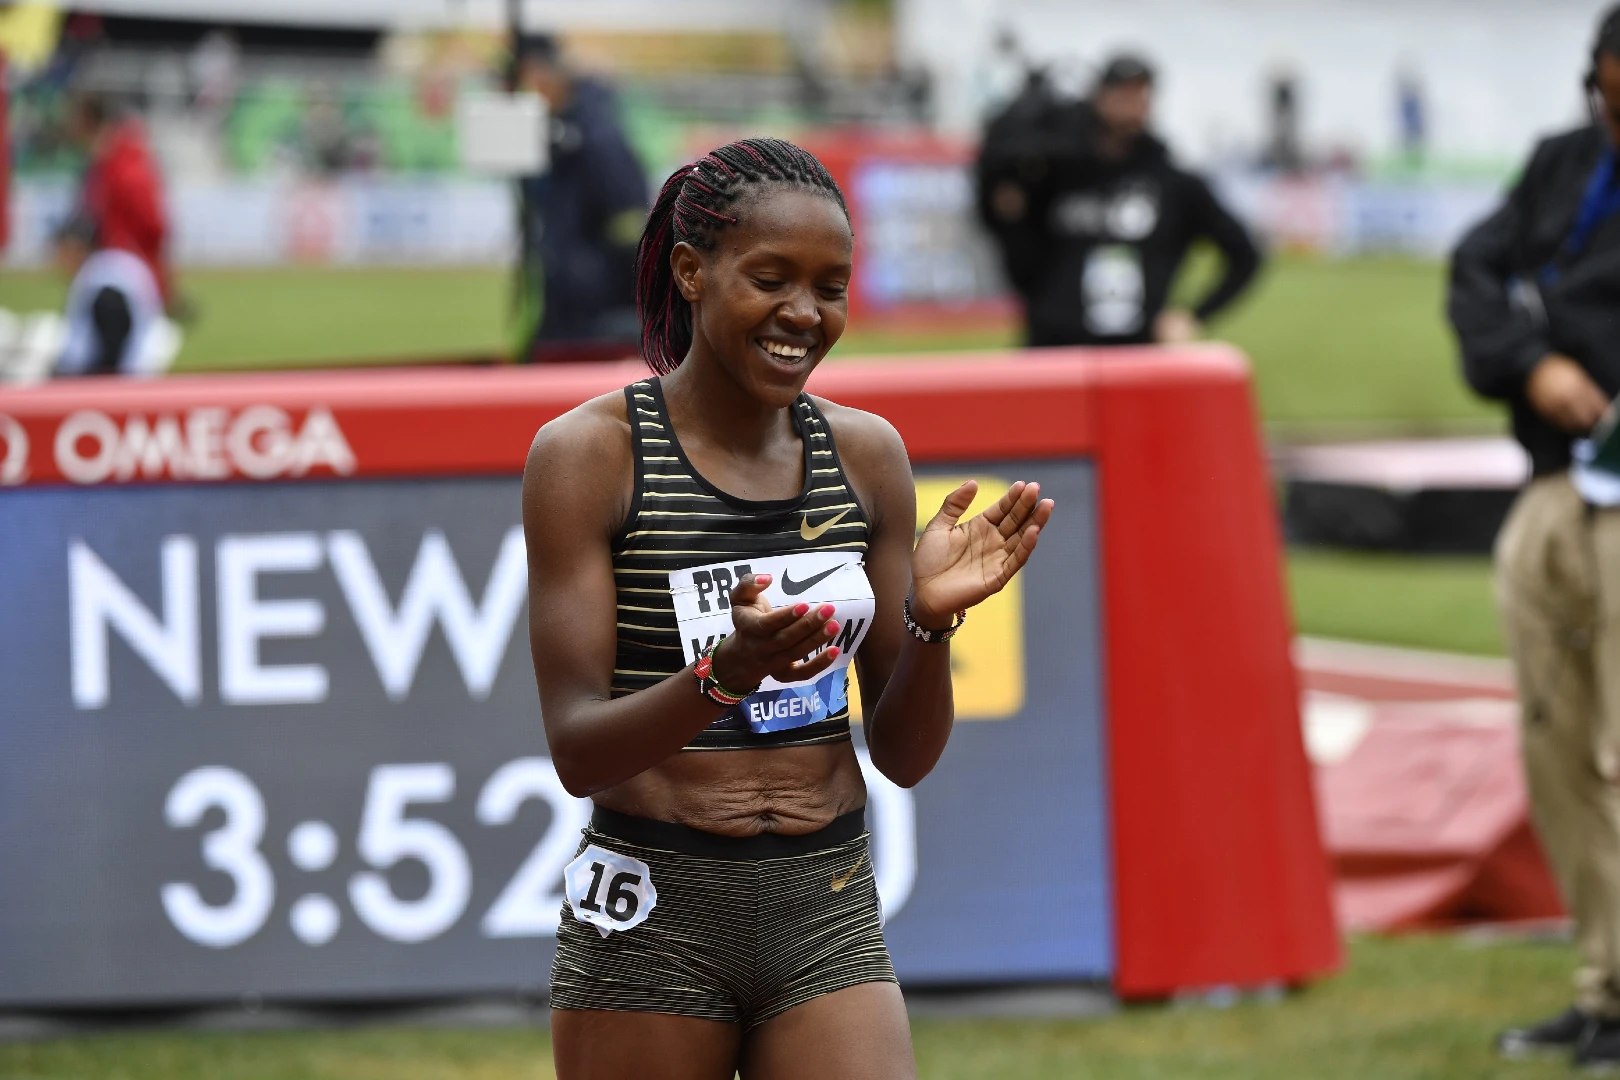 Wet and chilly conditions couldn’t stop fast times at Prefontaine Classic 2022: RRW